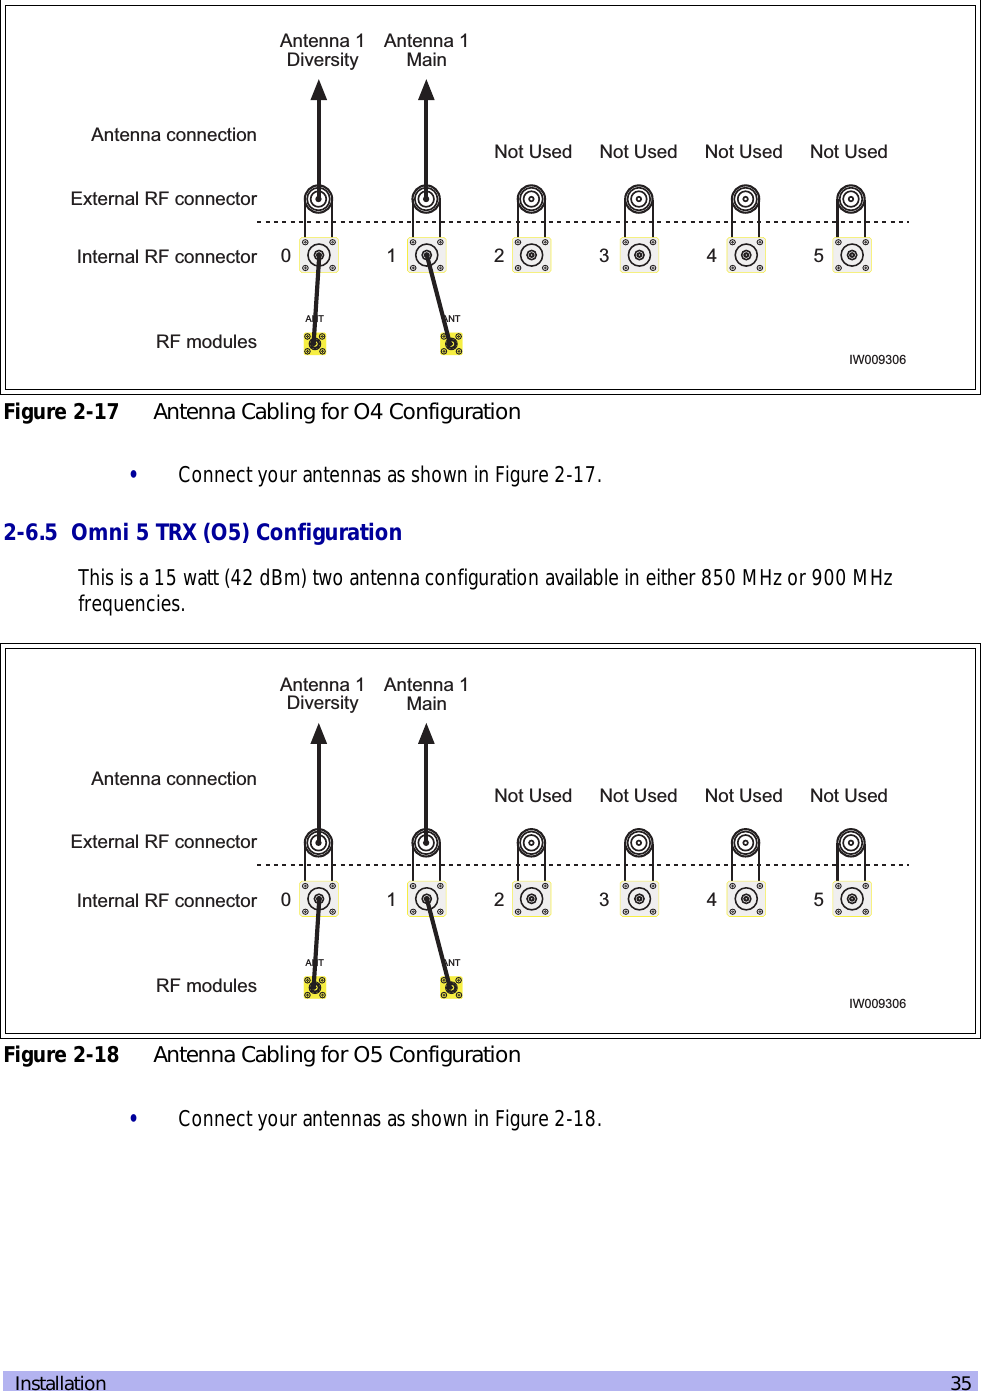  Installation 35•Connect your antennas as shown in Figure 2-17.2-6.5  Omni 5 TRX (O5) ConfigurationThis is a 15 watt (42 dBm) two antenna configuration available in either 850 MHz or 900 MHz frequencies.•Connect your antennas as shown in Figure 2-18.Figure 2-17 Antenna Cabling for O4 ConfigurationFigure 2-18 Antenna Cabling for O5 ConfigurationANTRF modulesIW009306Internal RF connectorExternal RF connectorAntenna 1DiversityAntenna connection1 2 3 4 50Not UsedNot Used Not Used Not UsedAntenna 1MainANTANTRF modulesIW009306Internal RF connectorExternal RF connectorAntenna 1DiversityAntenna connection1 2 3 4 50Not UsedNot Used Not Used Not UsedAntenna 1MainANT